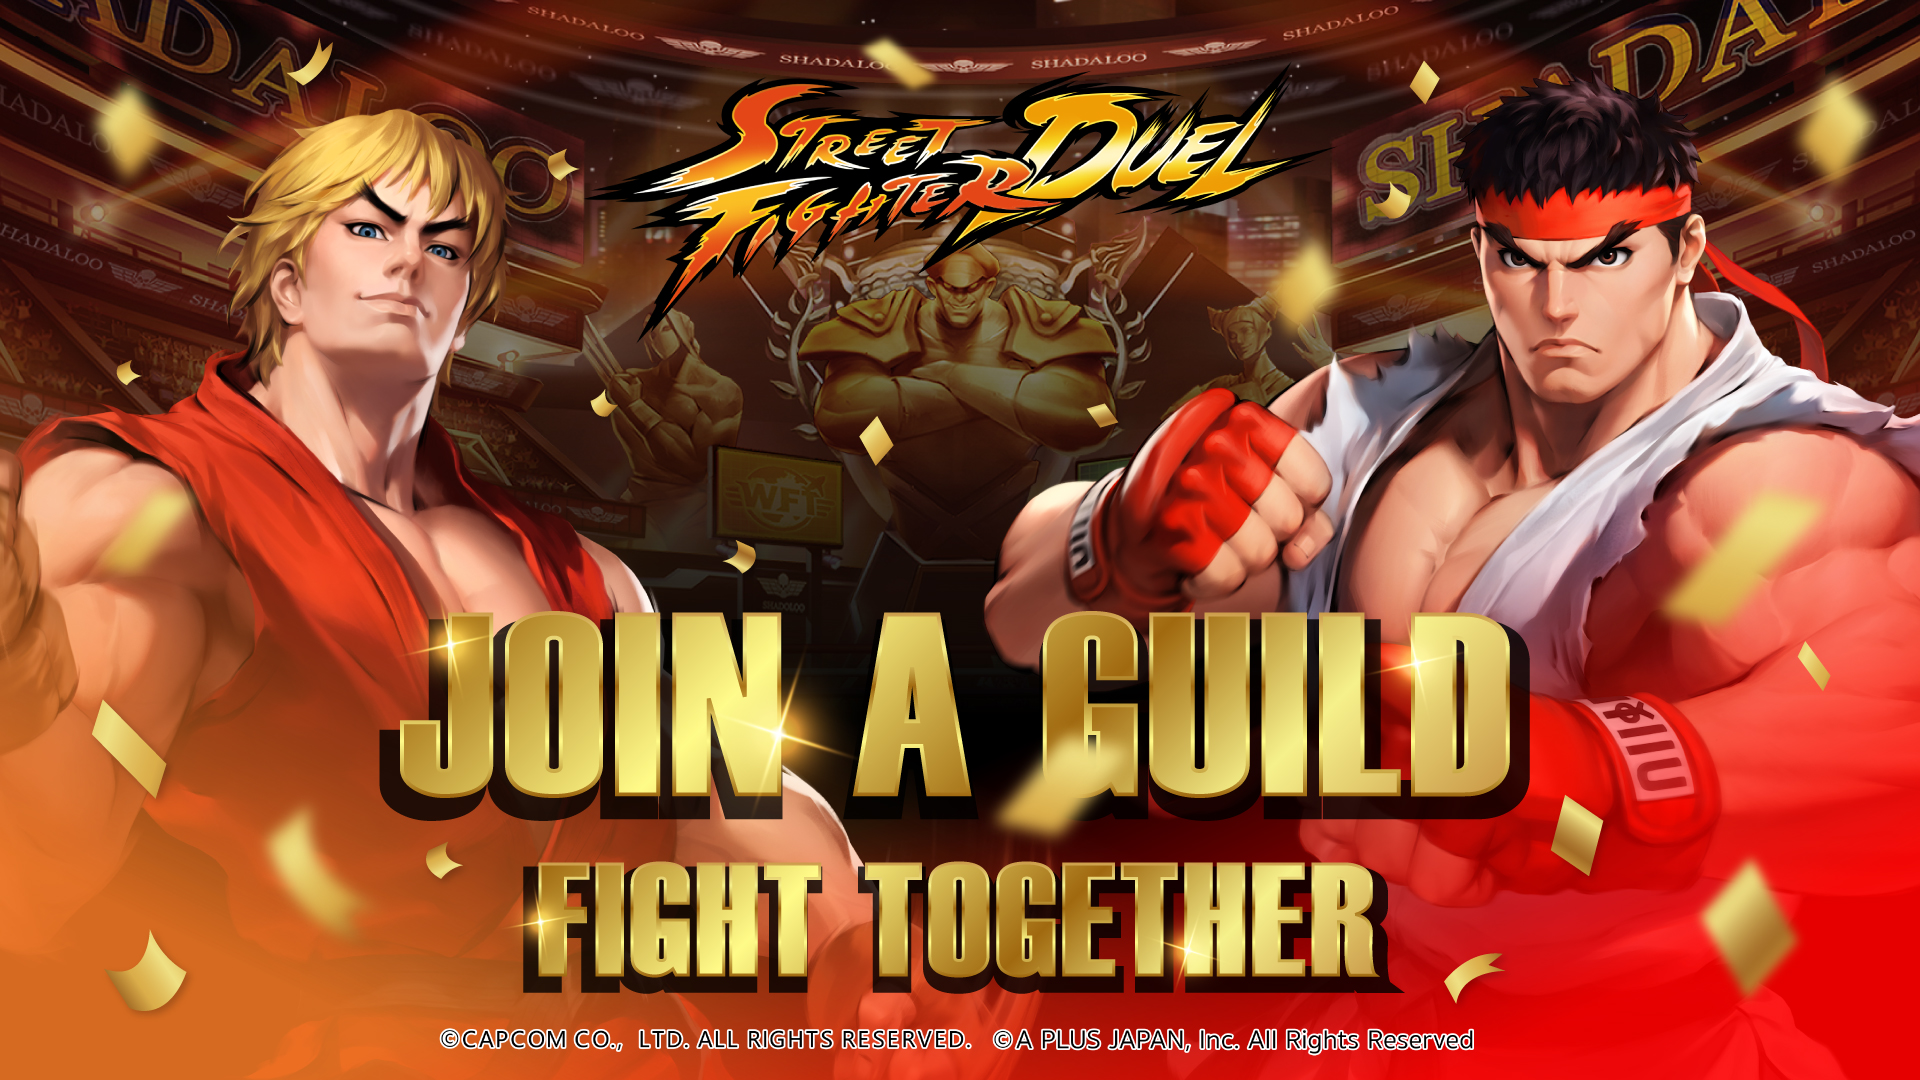 Street Fighter: Duel on the App Store